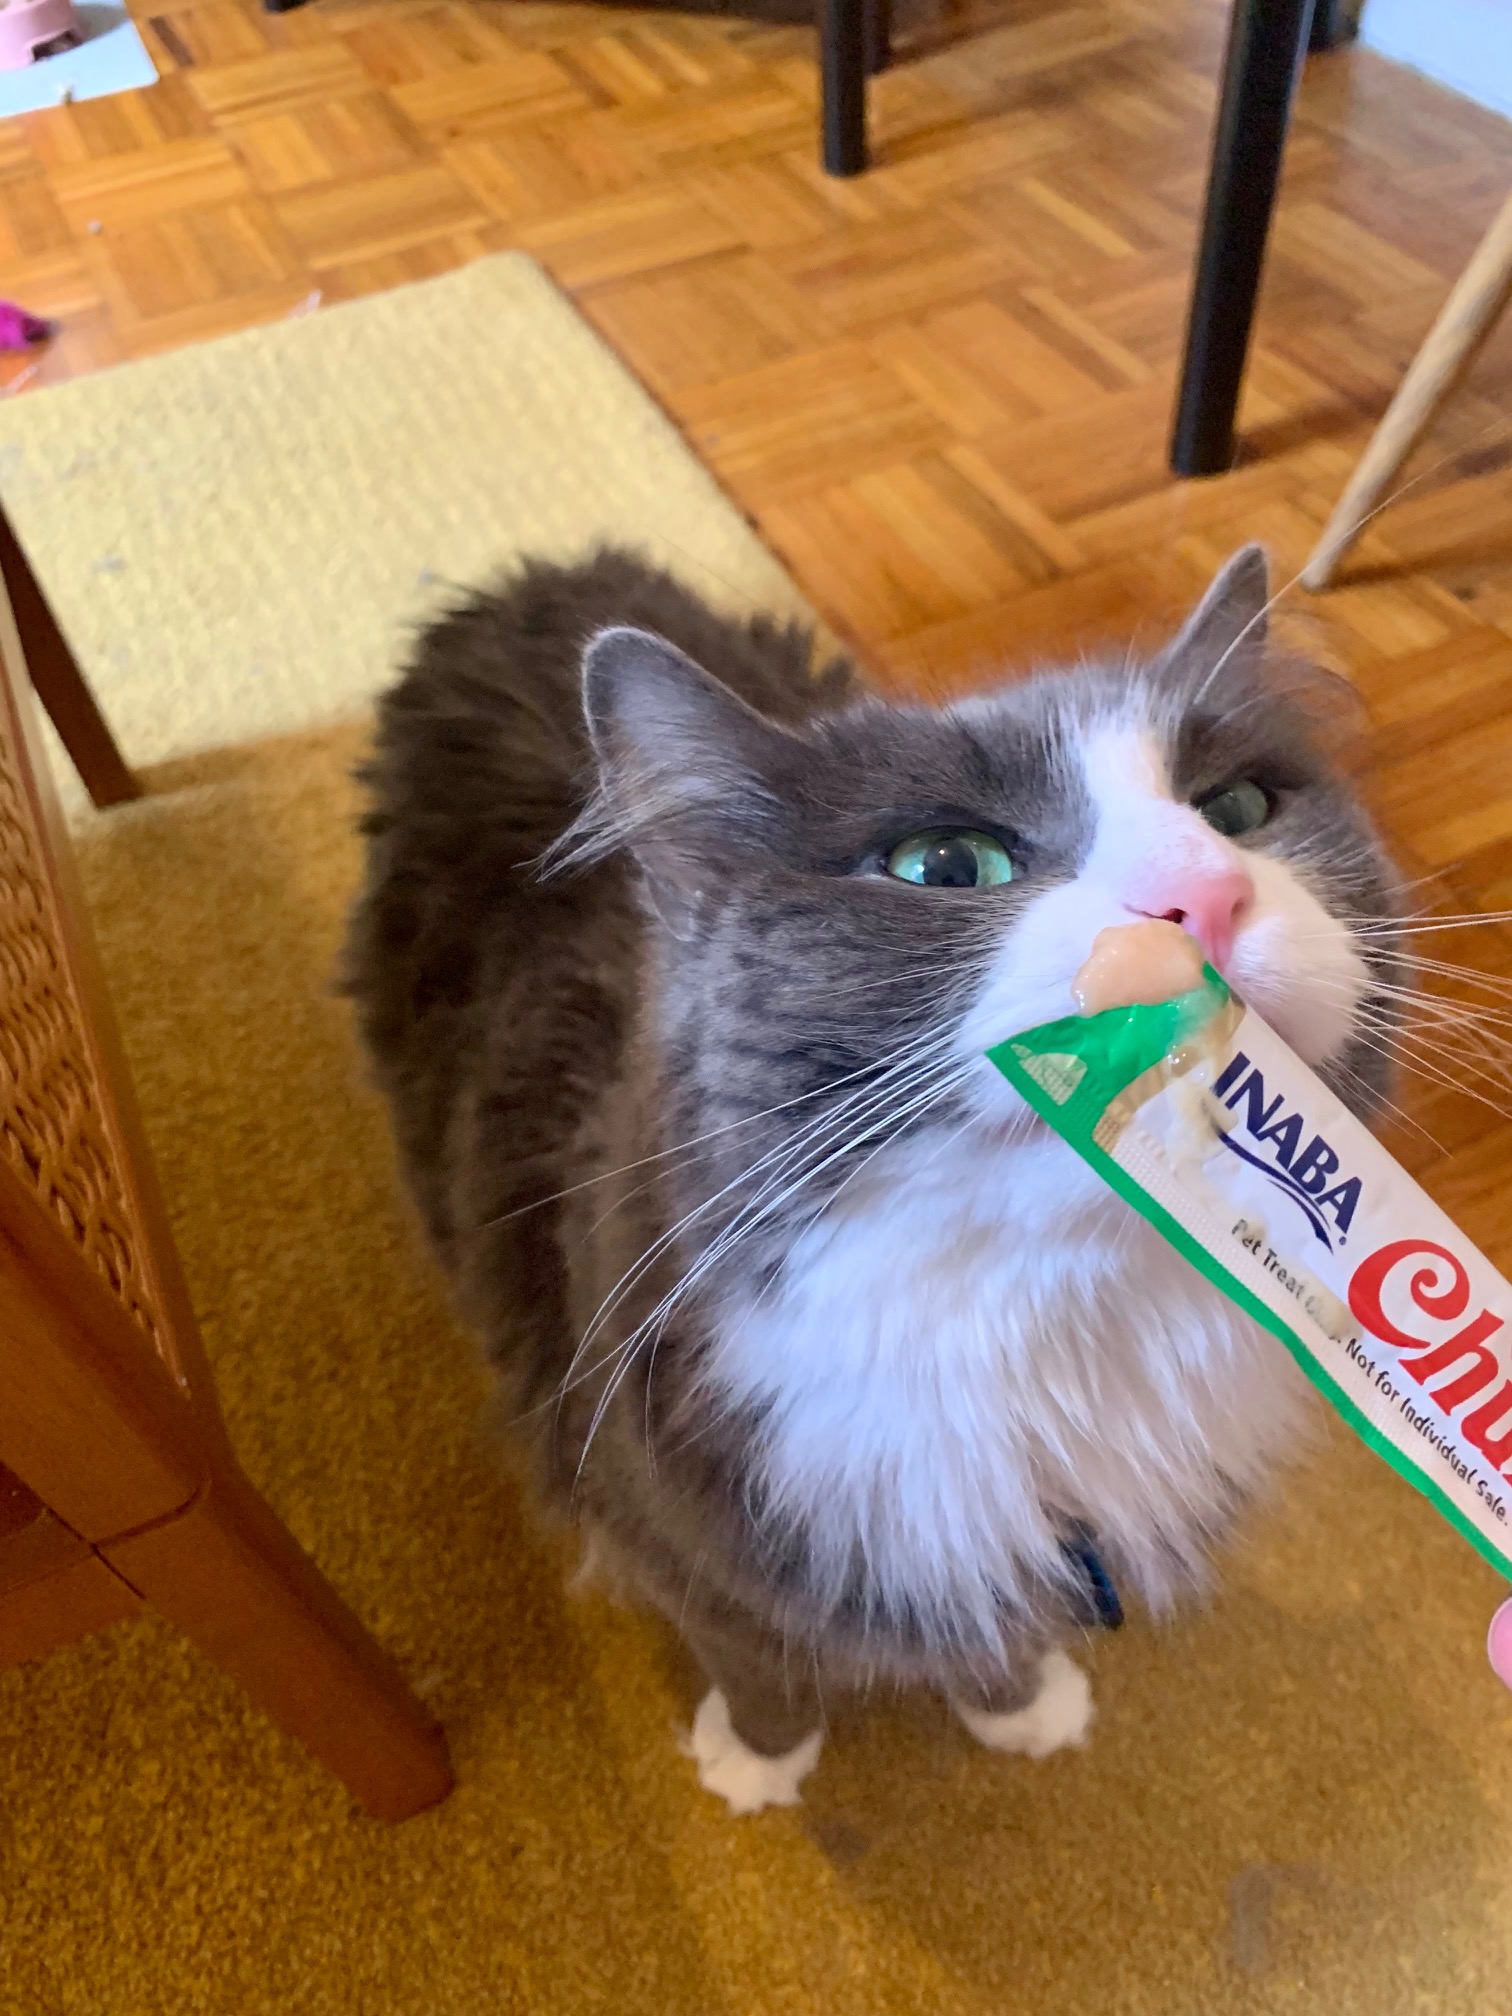 A long-haired gray-and-white cat with mint green eyes sniffing an Inaba Churu treat tube.